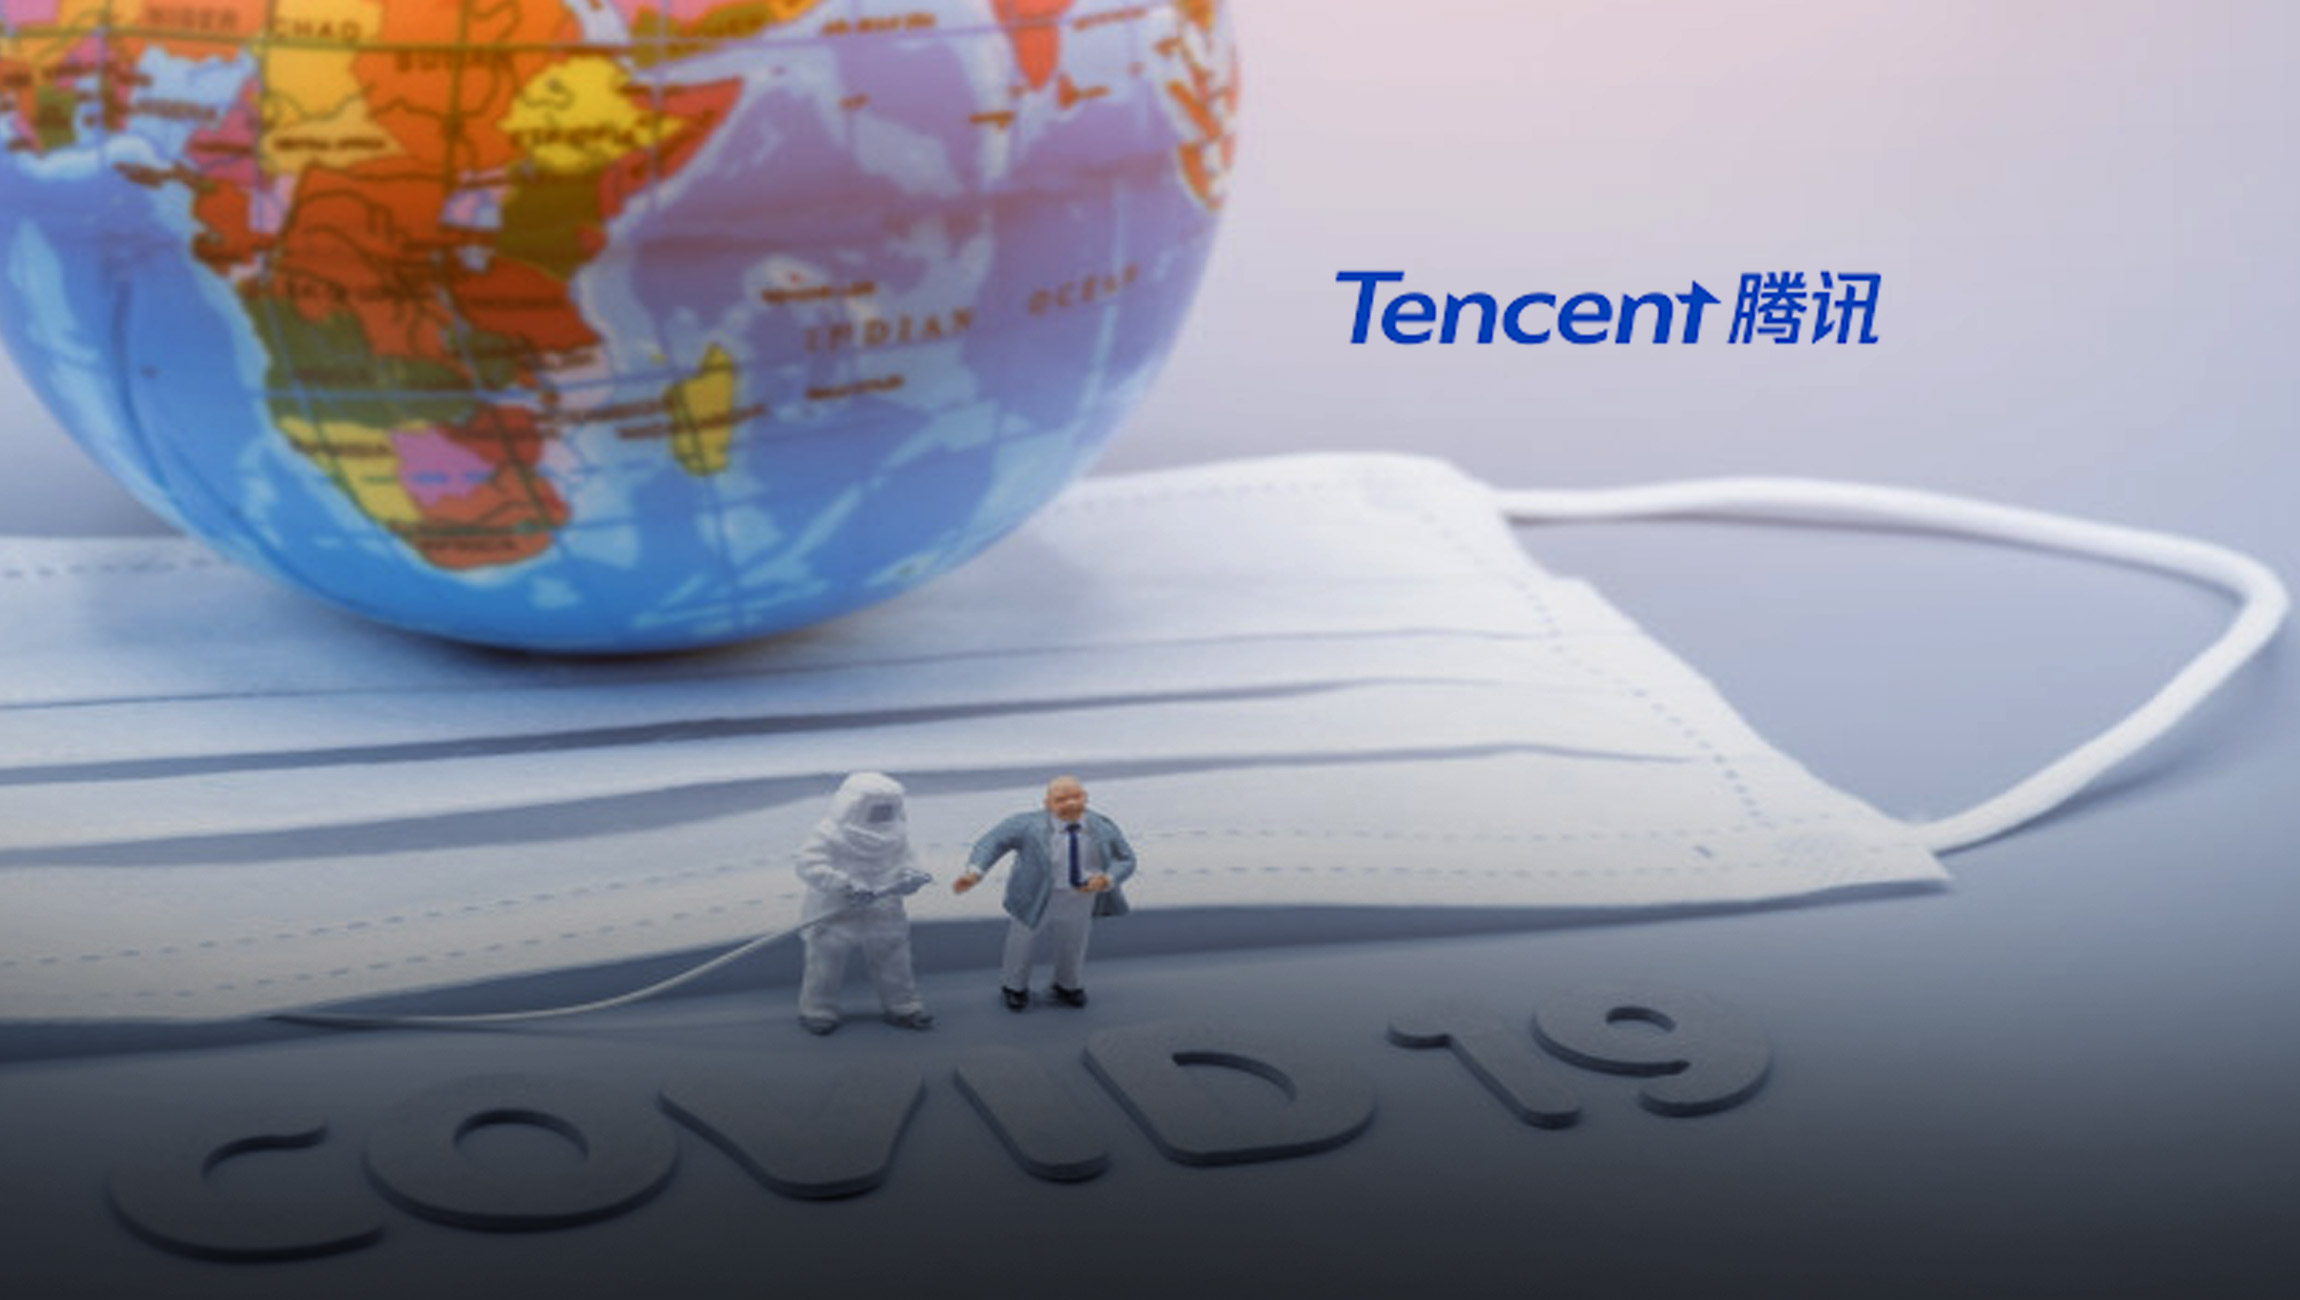 WHO and Tencent Deepened Collaboration to Fight Against COVID-19